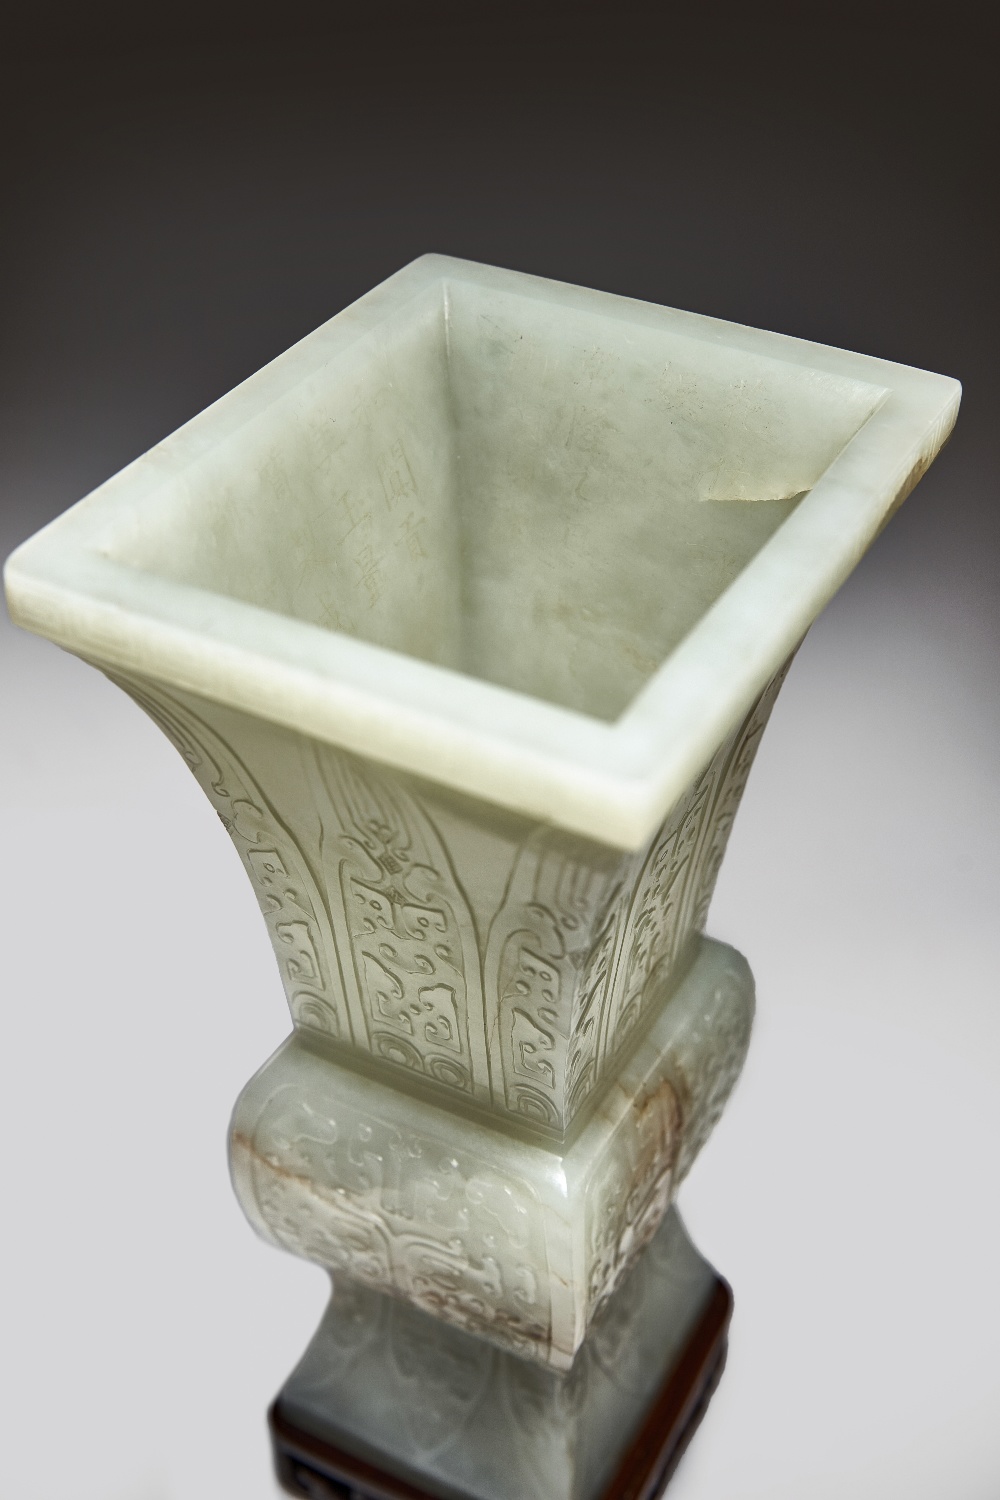 A RARE CHINESE IMPERIAL PALE CELADON JADE ARCHAISTIC VASE, FANGGU FOUR CHARACTER QIANLONG YU WAN - Image 3 of 6